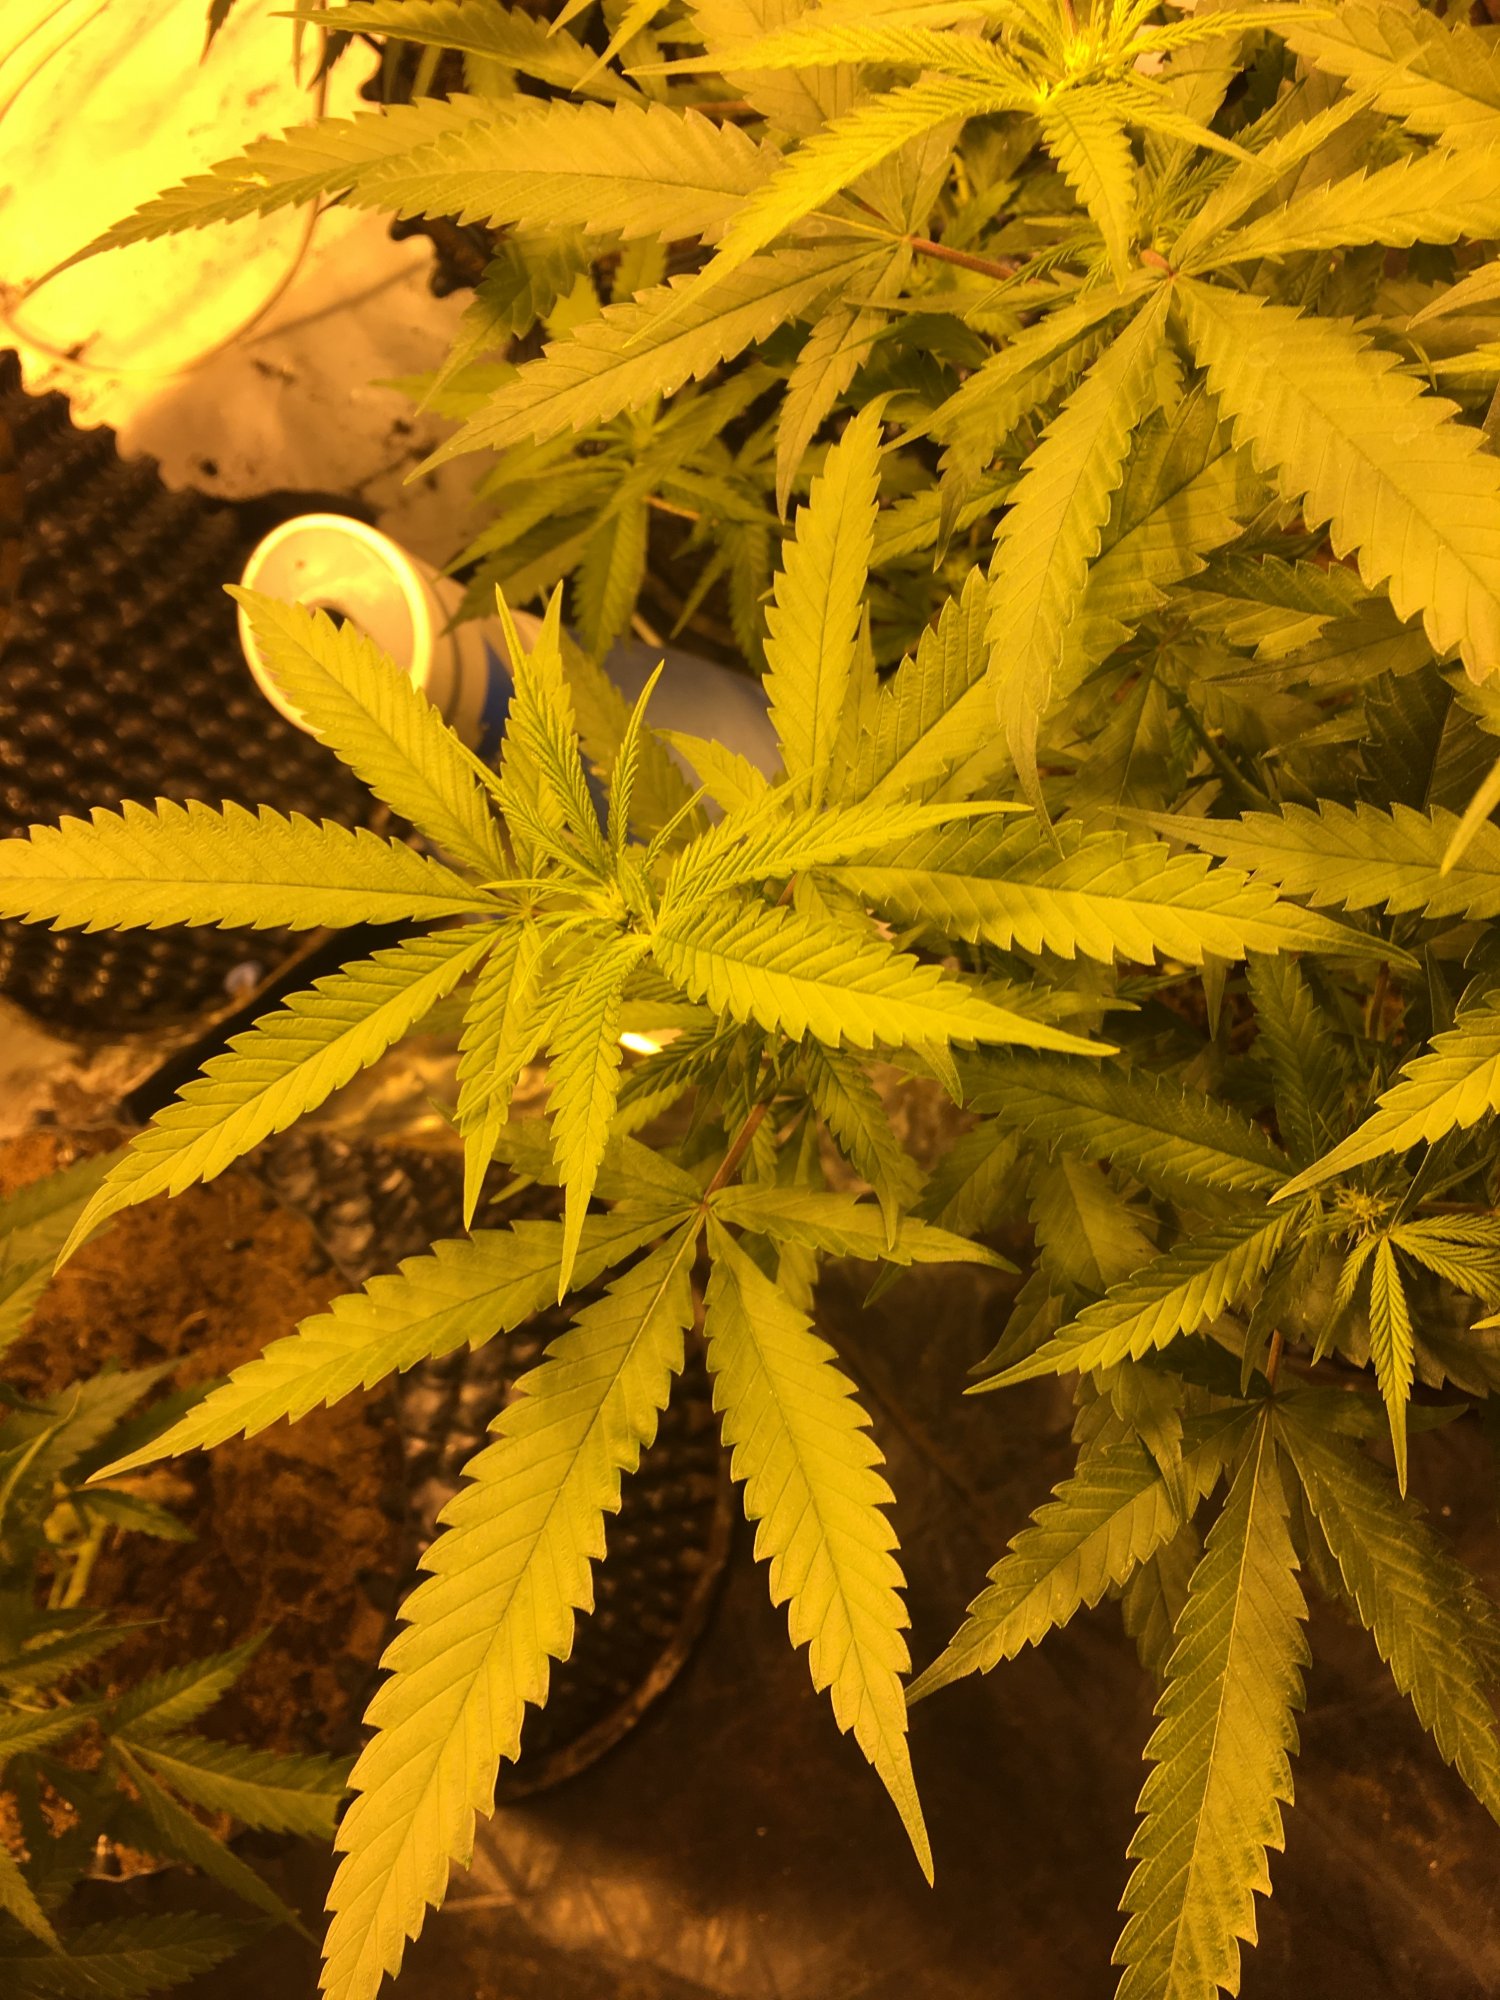 Please help me with strain and possible yield using ph perfectbig budair pots 30 percent humi